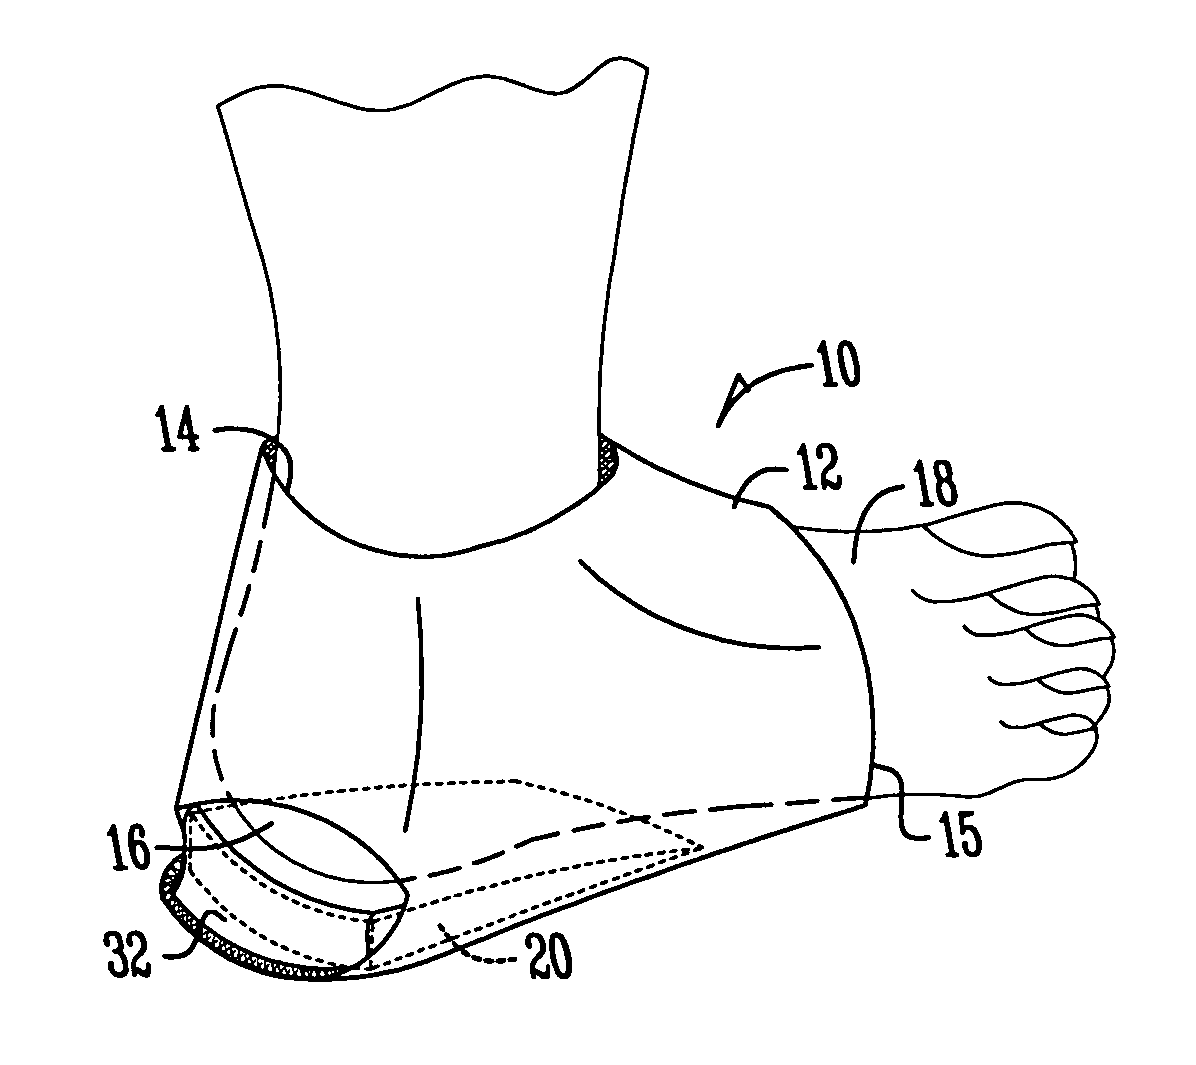 Device for heel shock absorption, swelling, and pain treatment